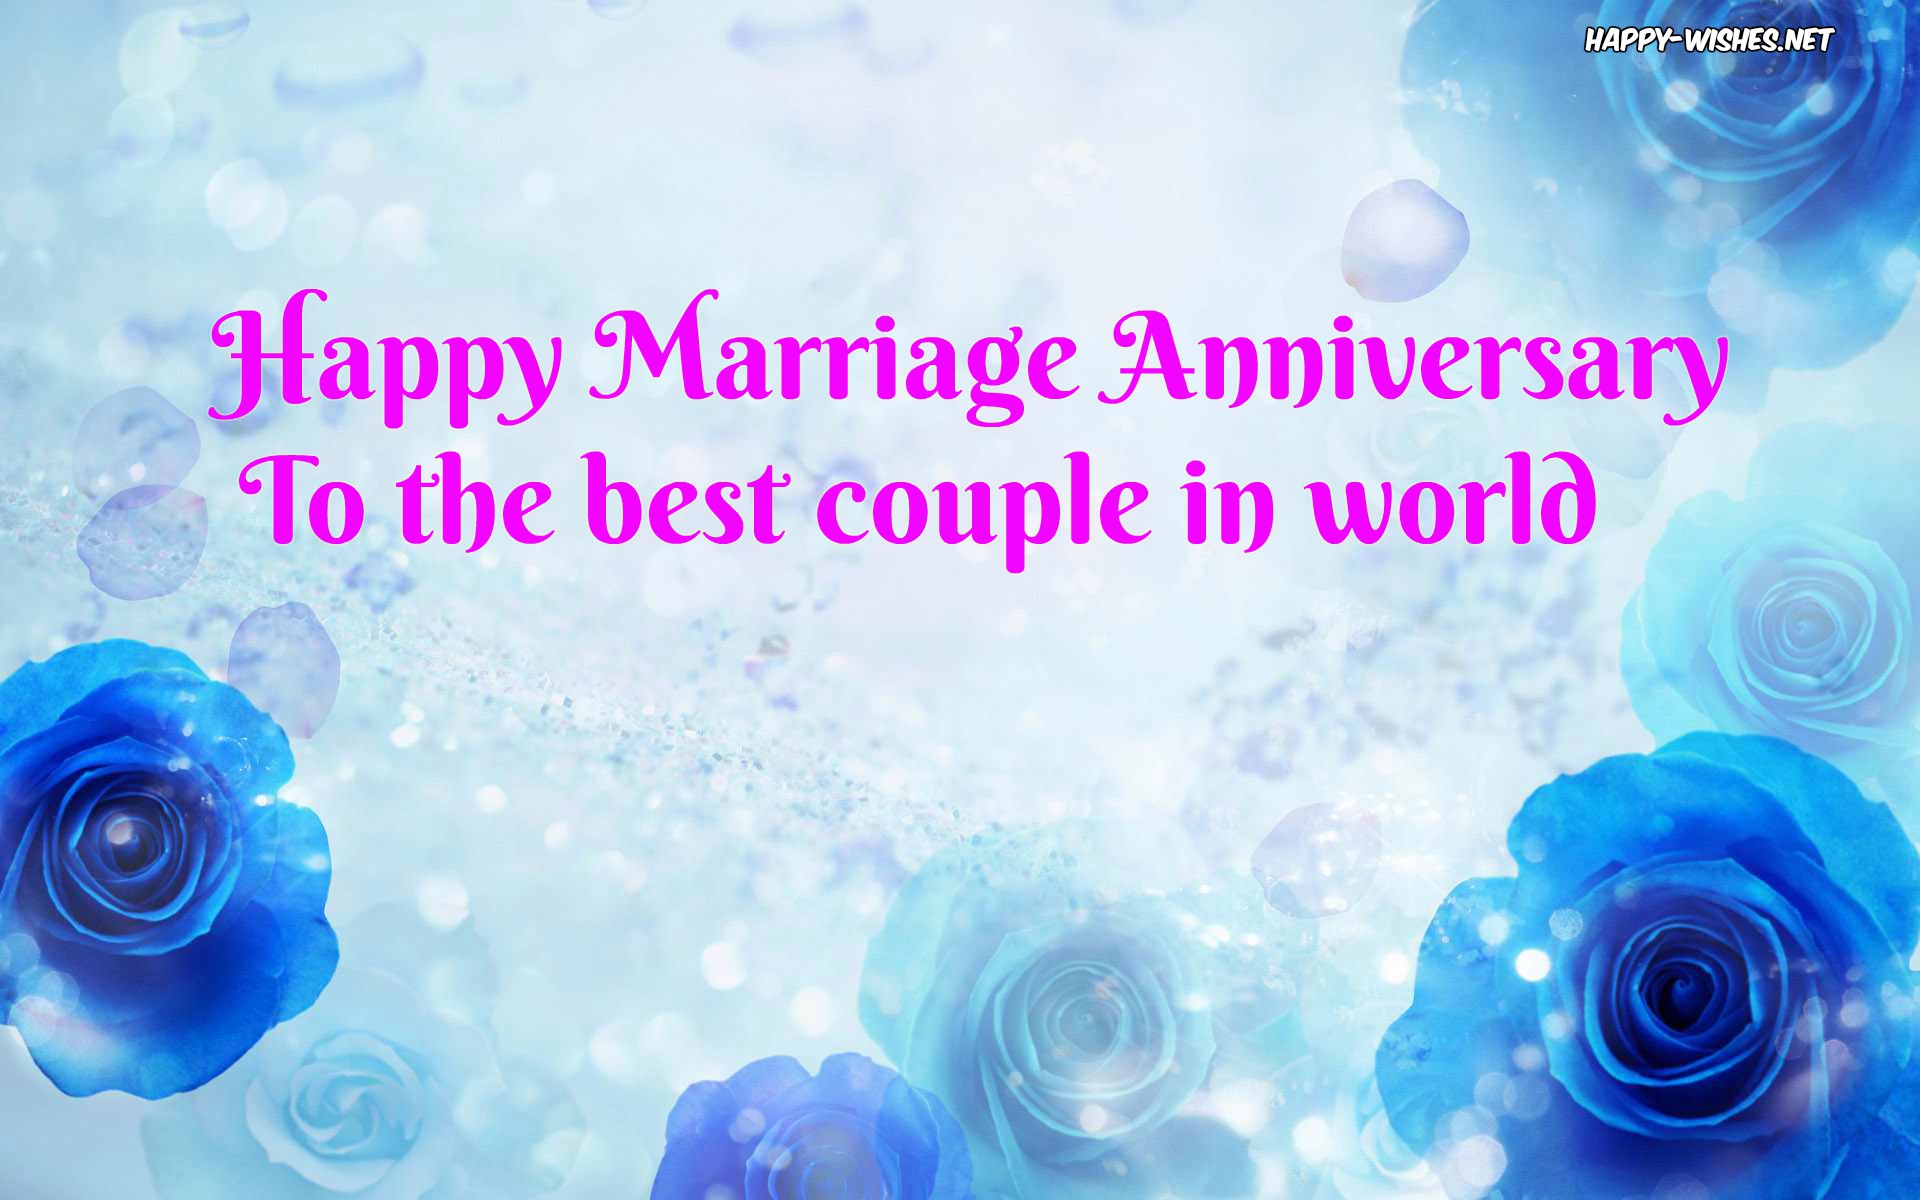 Happy Anniversary Quotes For Brother - Blue Rose Background Hd - HD Wallpaper 